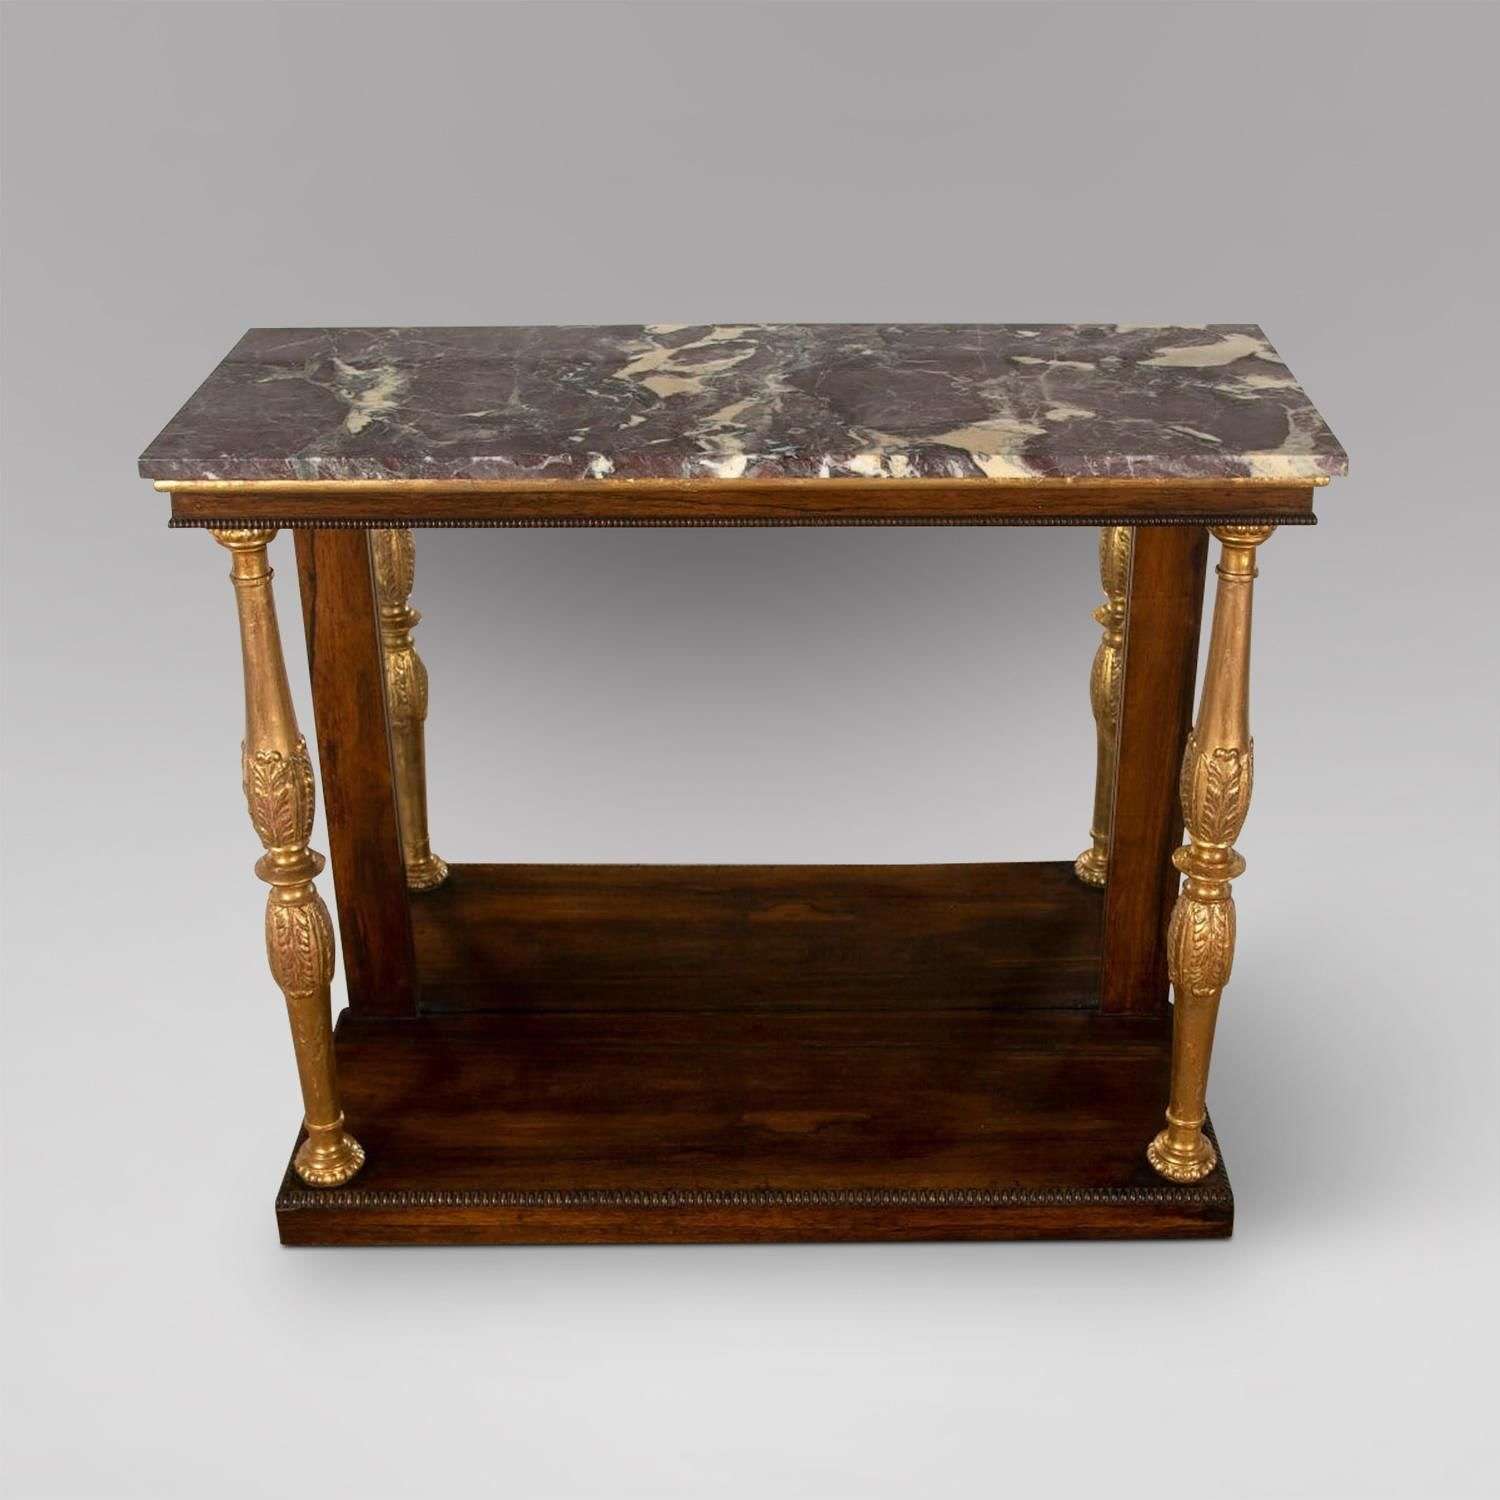 A Regency Console Table with Marble Top